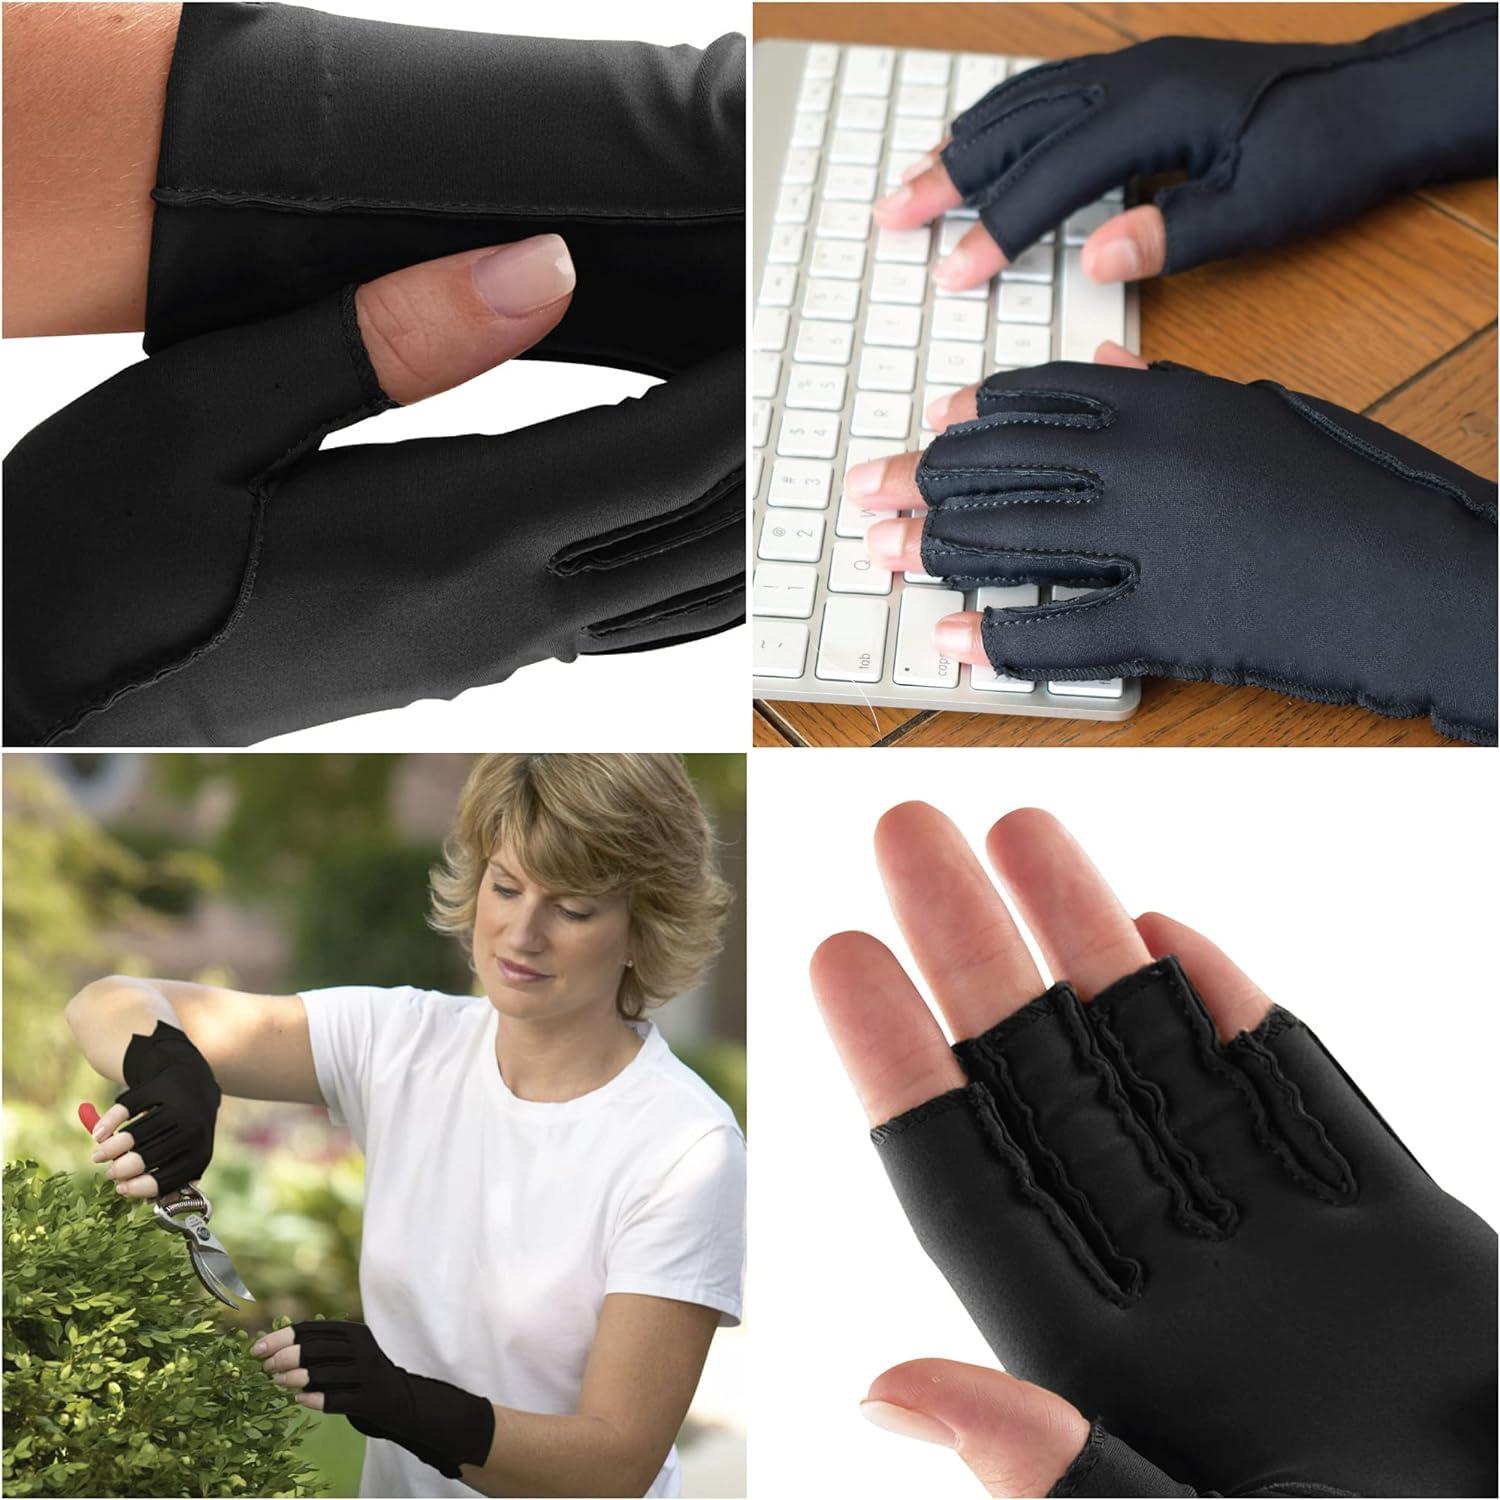 Isotoner Therapeutic Gloves (Open Finger)